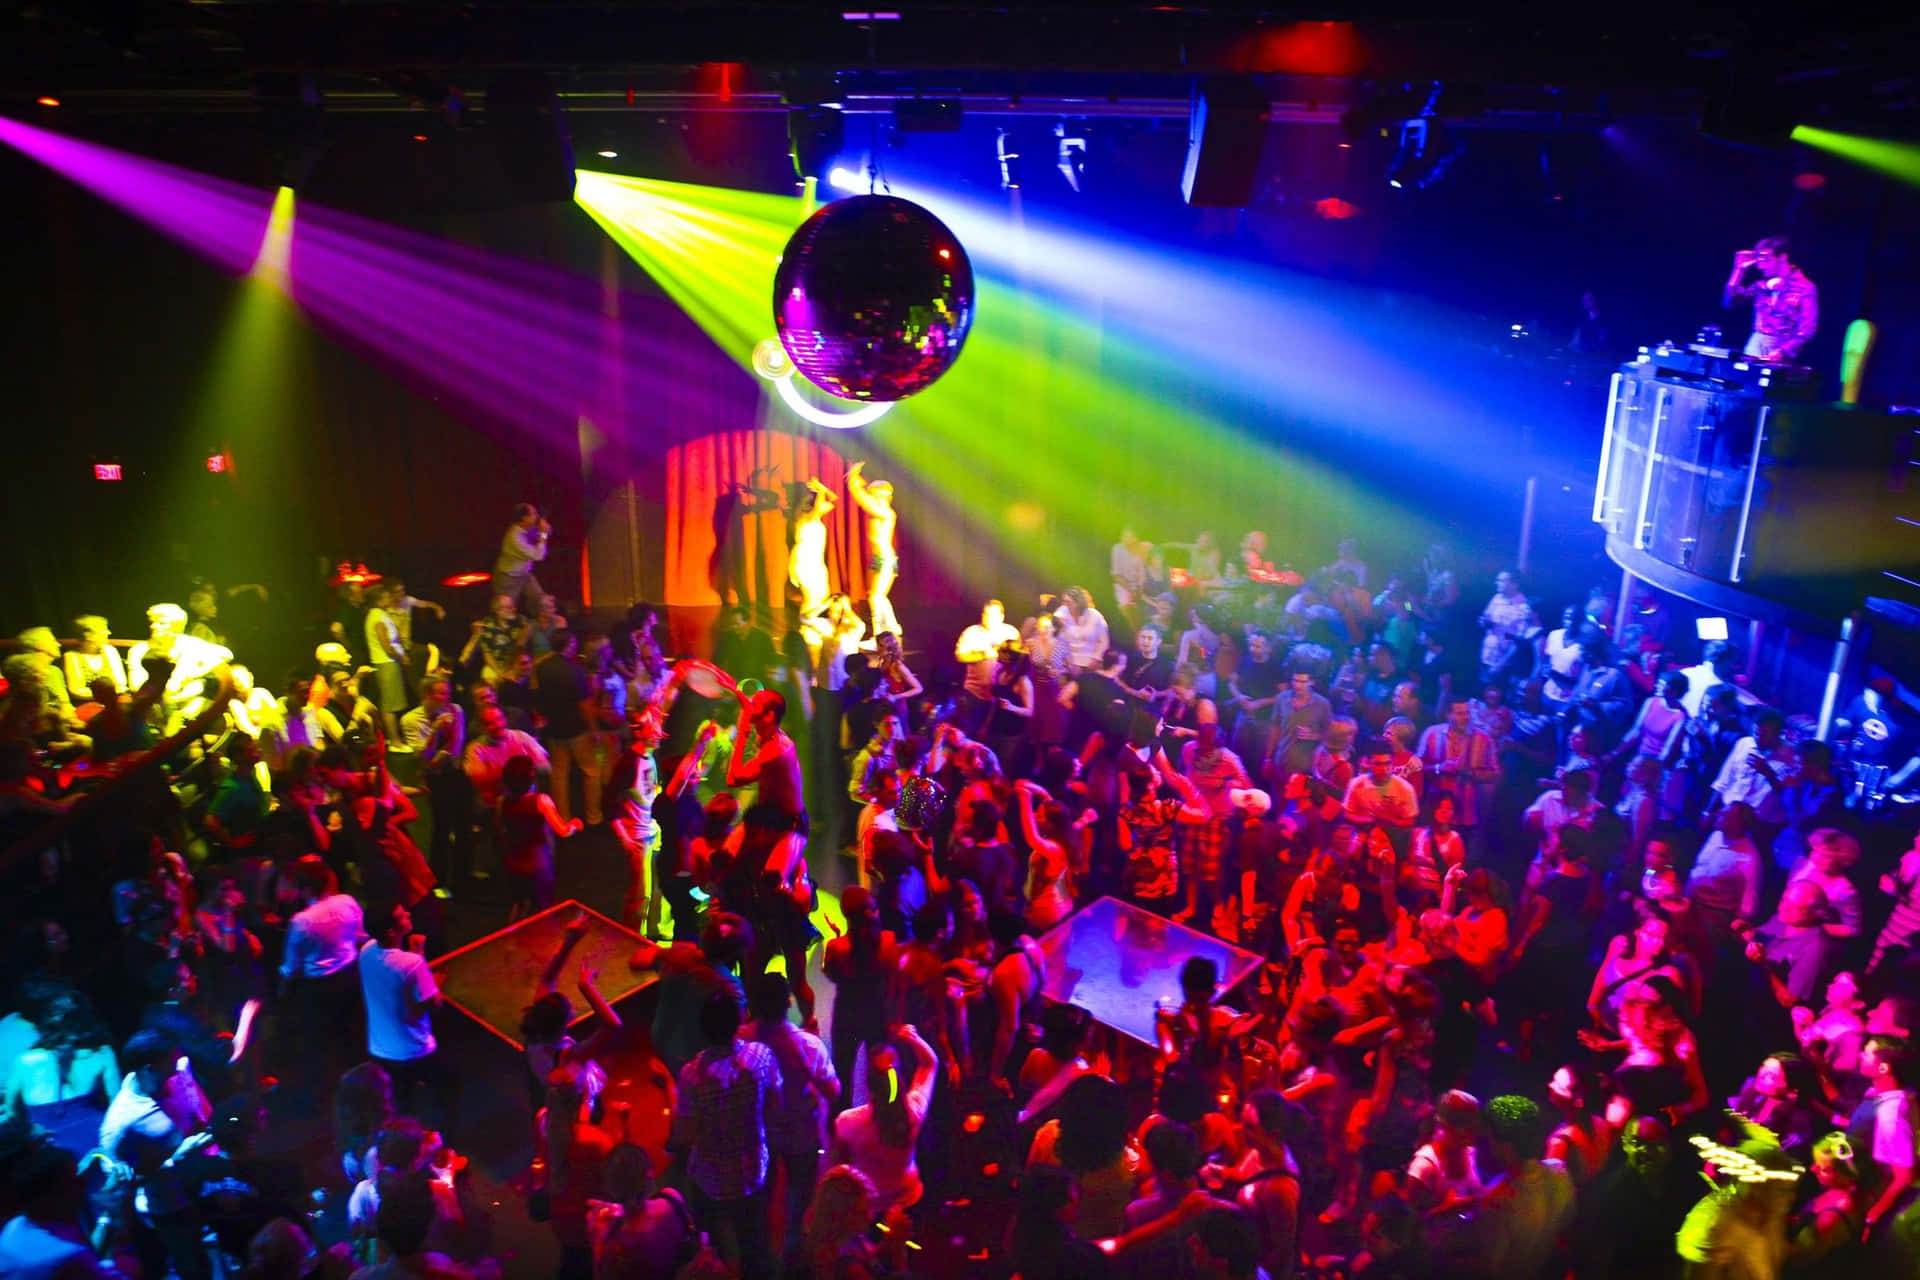 A Crowd Of People At A Nightclub With Colorful Lights